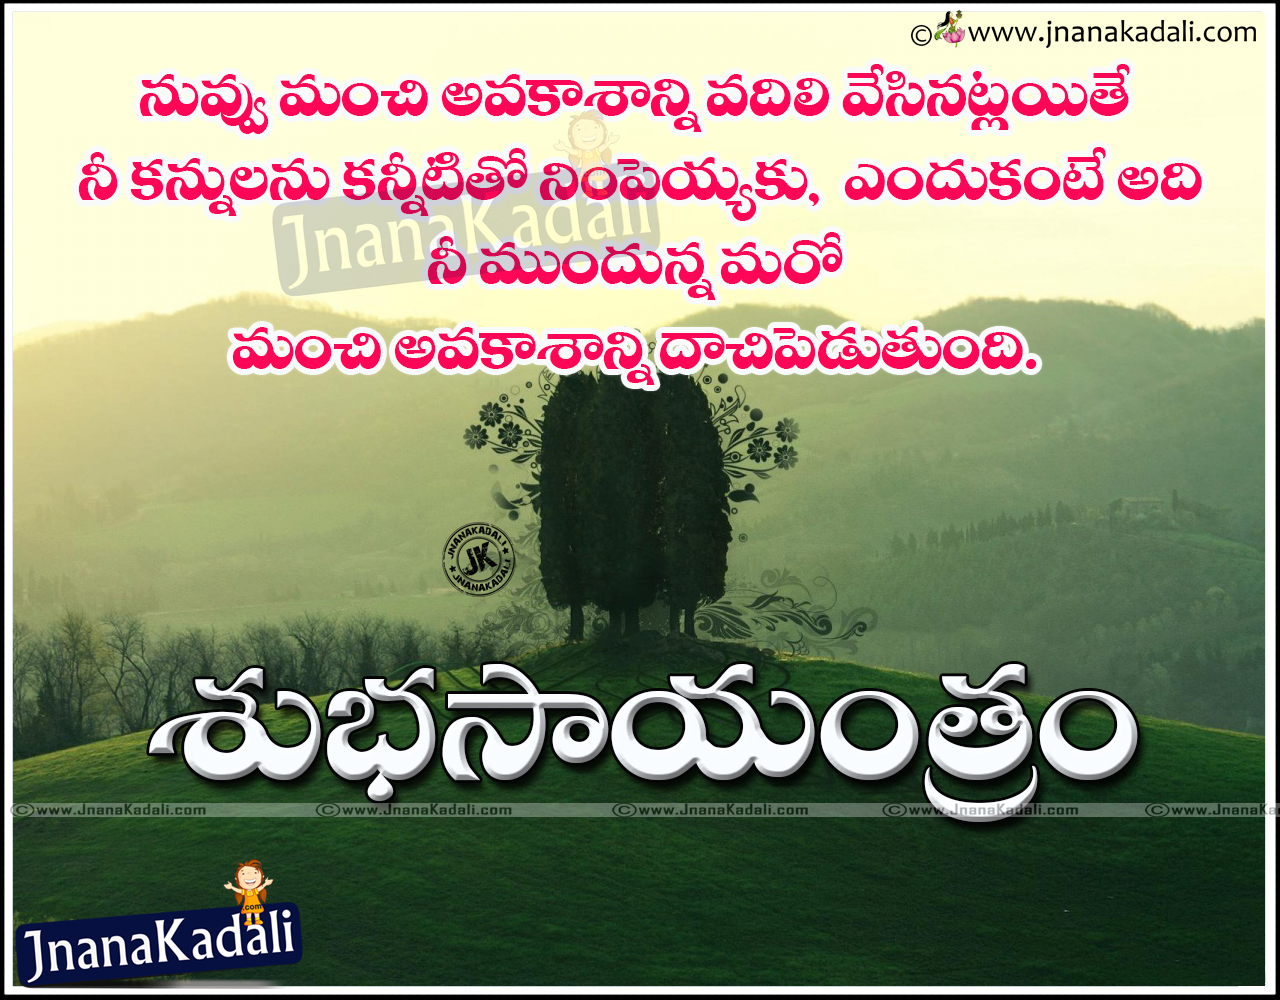 Here is a Good Evening Telugu sms to Friend Telugu Life Goals Quotes and & Good Evening Wishes s Top Trending Telugu Language Evening Quotes